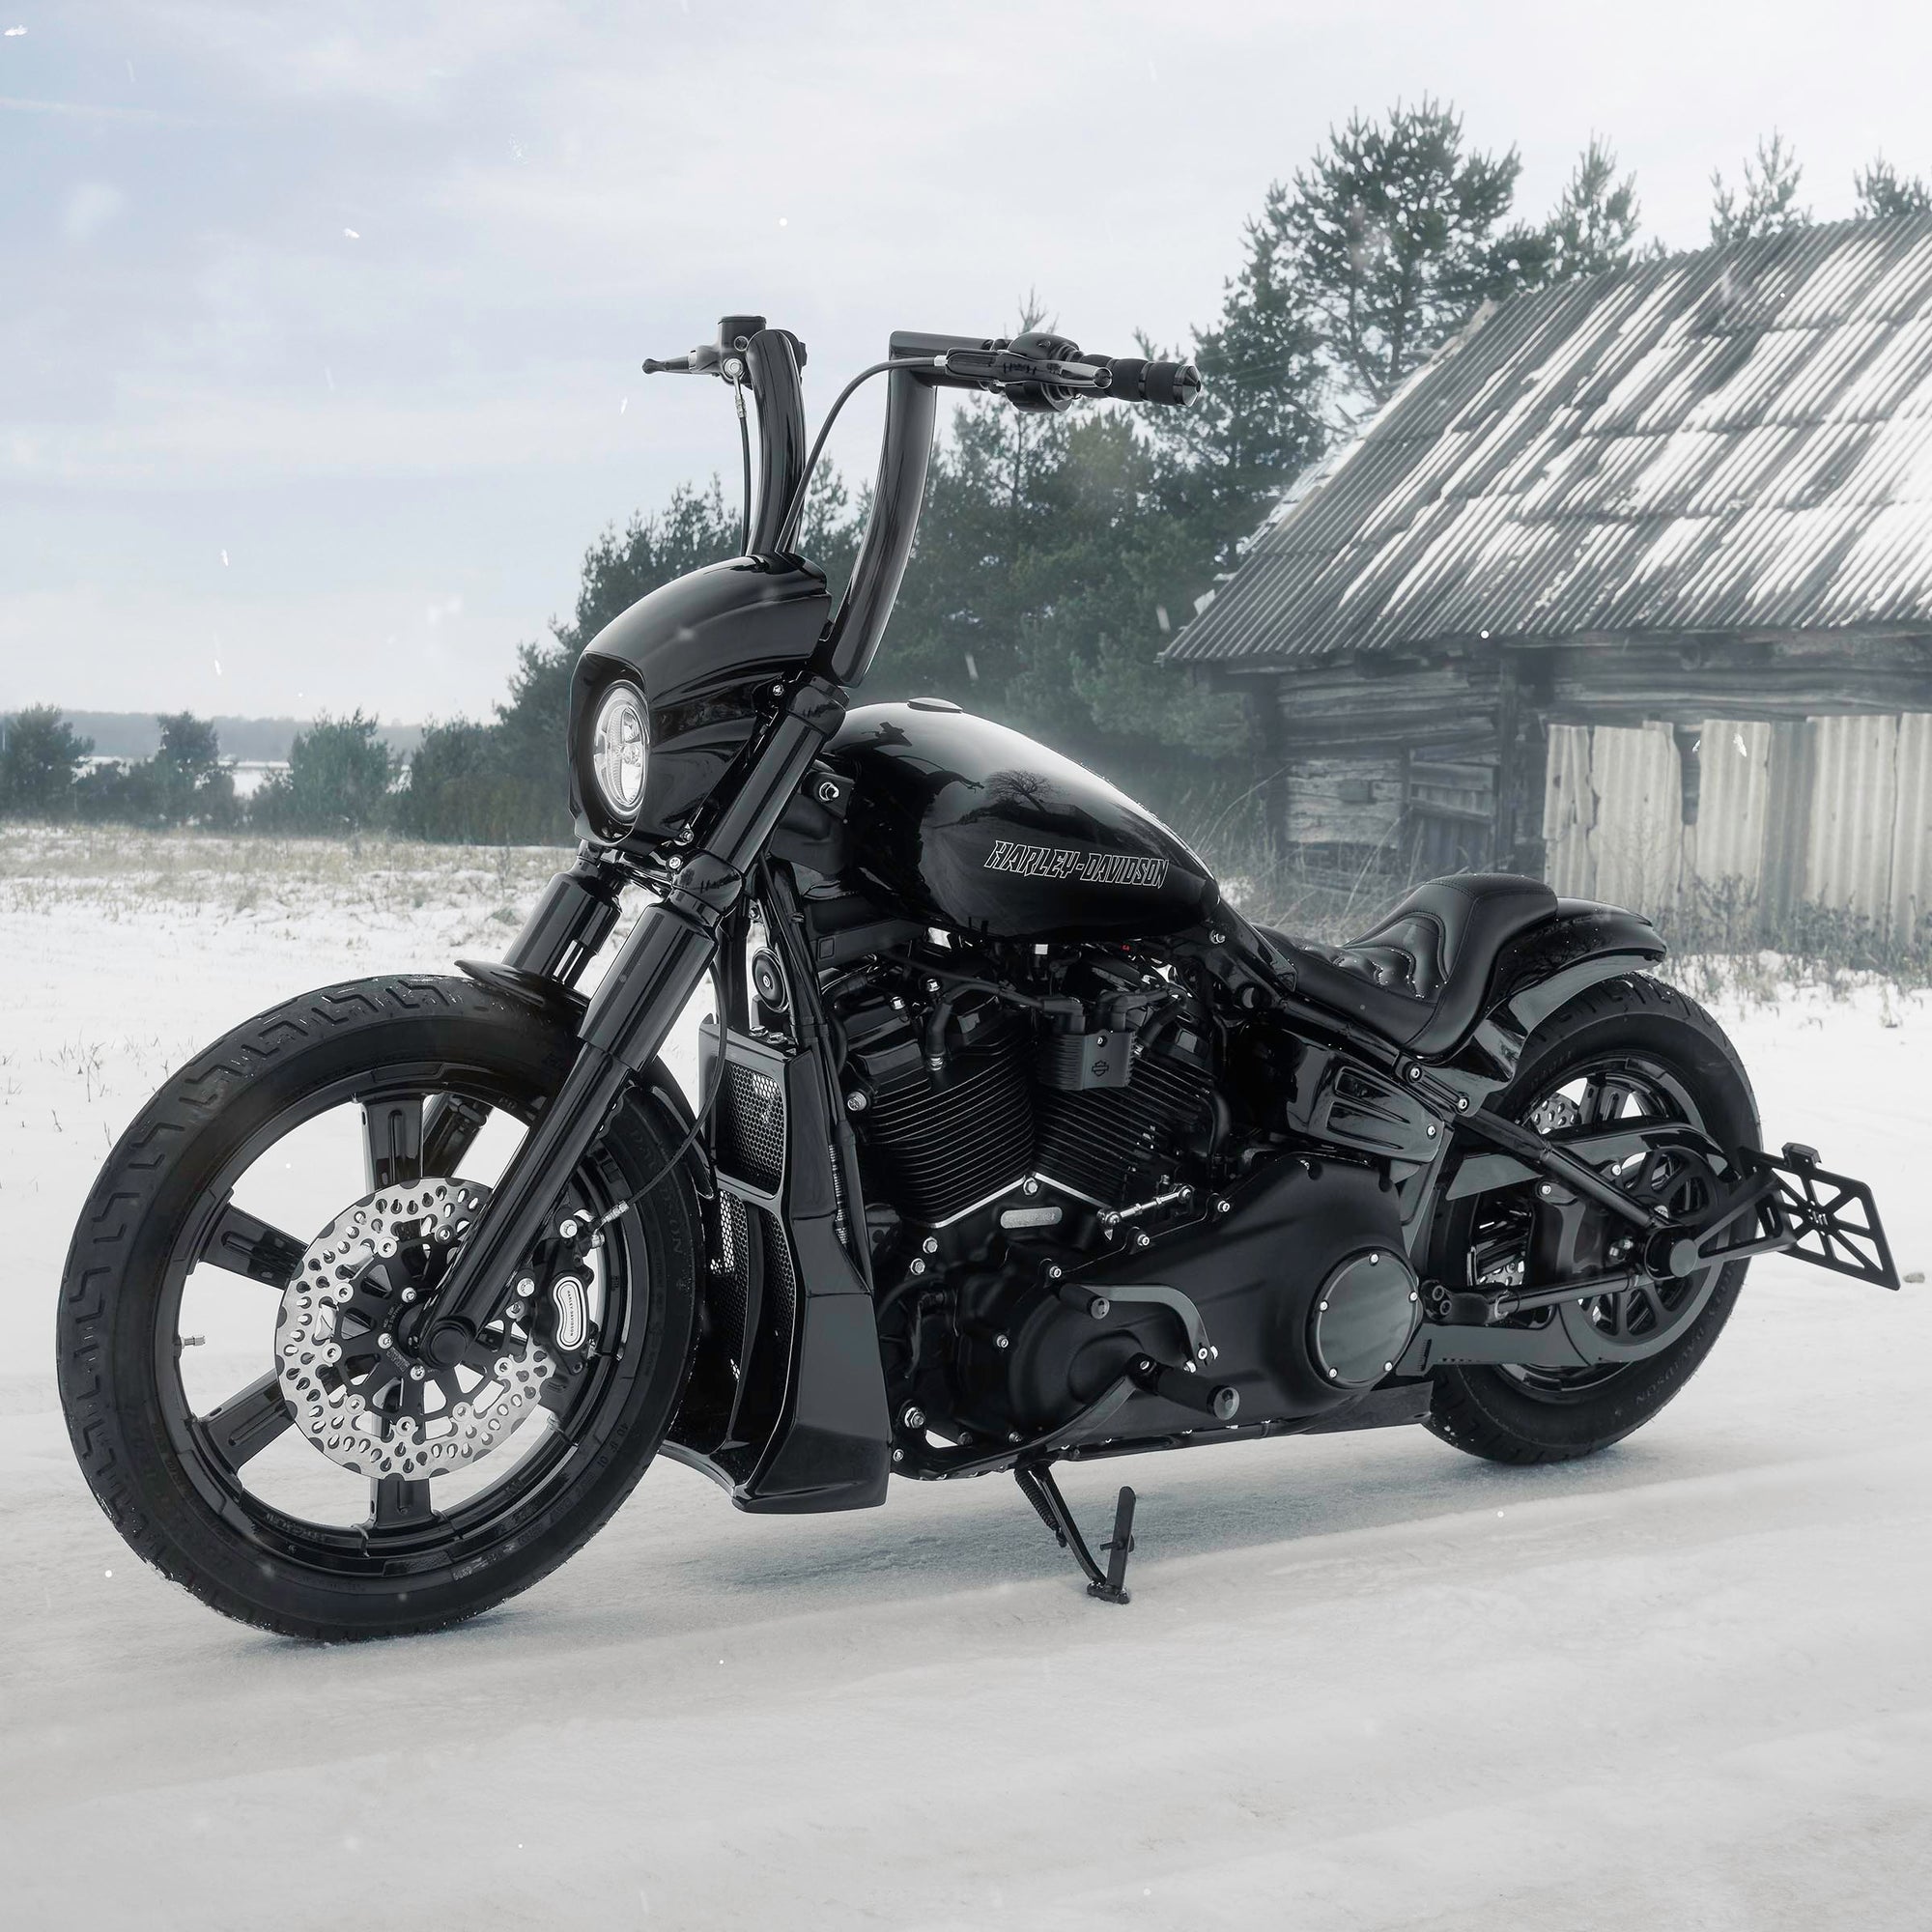 Modified Harley Davidson Softail motorcycle with Killer Custom parts from the side outside on a gloomy winter day with an abandoned shack in the background